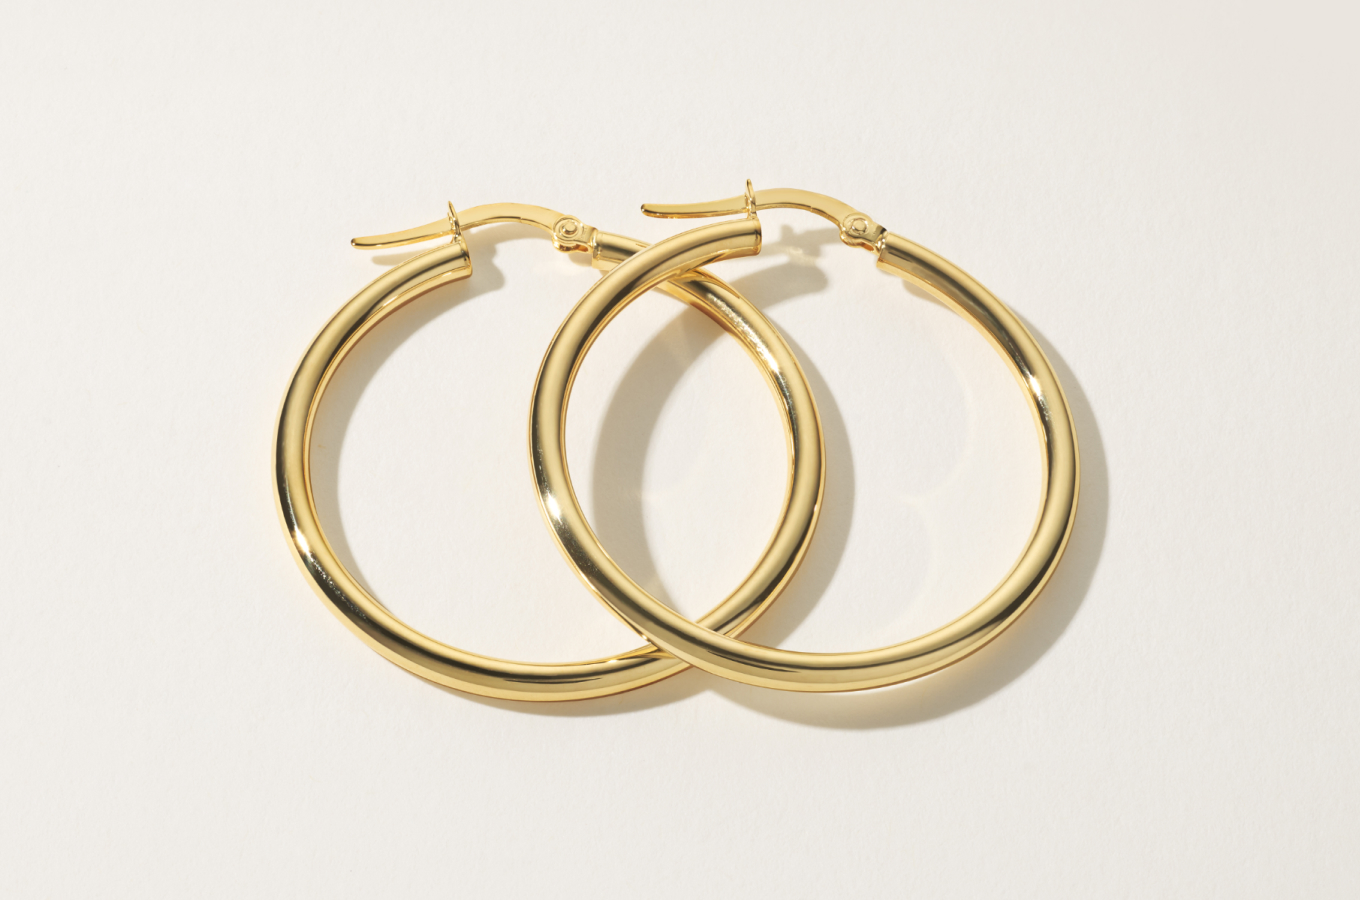 Bold Daily 14K Yellow Gold Hoops Slightly thicker than our Daily Hoops, these earrings feature the same classic look with a rounded profile and a lightweight feel, making them perfect for daily wear. A lever back keeps these beautiful 14-karat yellow gold hoops secure.